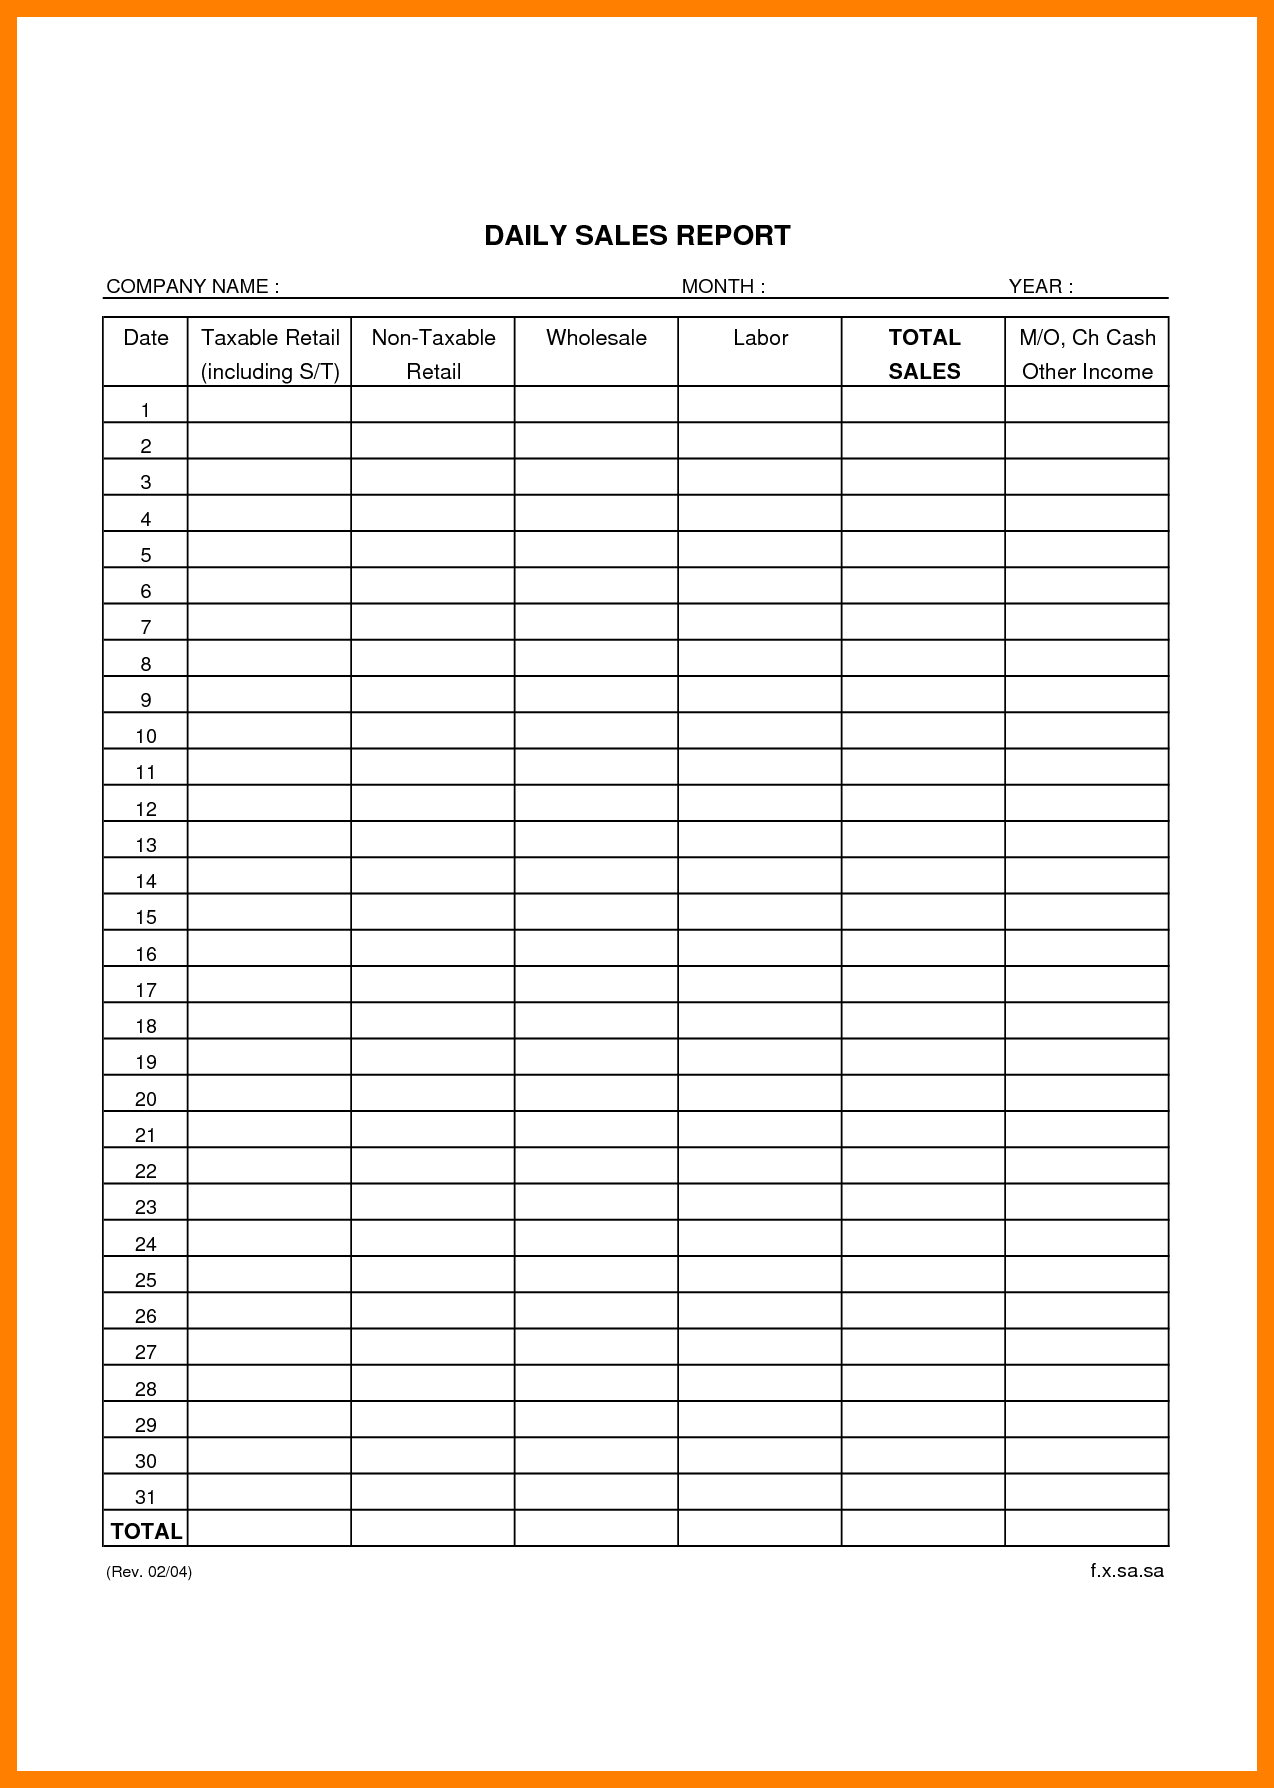 Excel Sales Report Template Free Download – Atlantaauctionco Intended For Free Daily Sales Report Excel Template